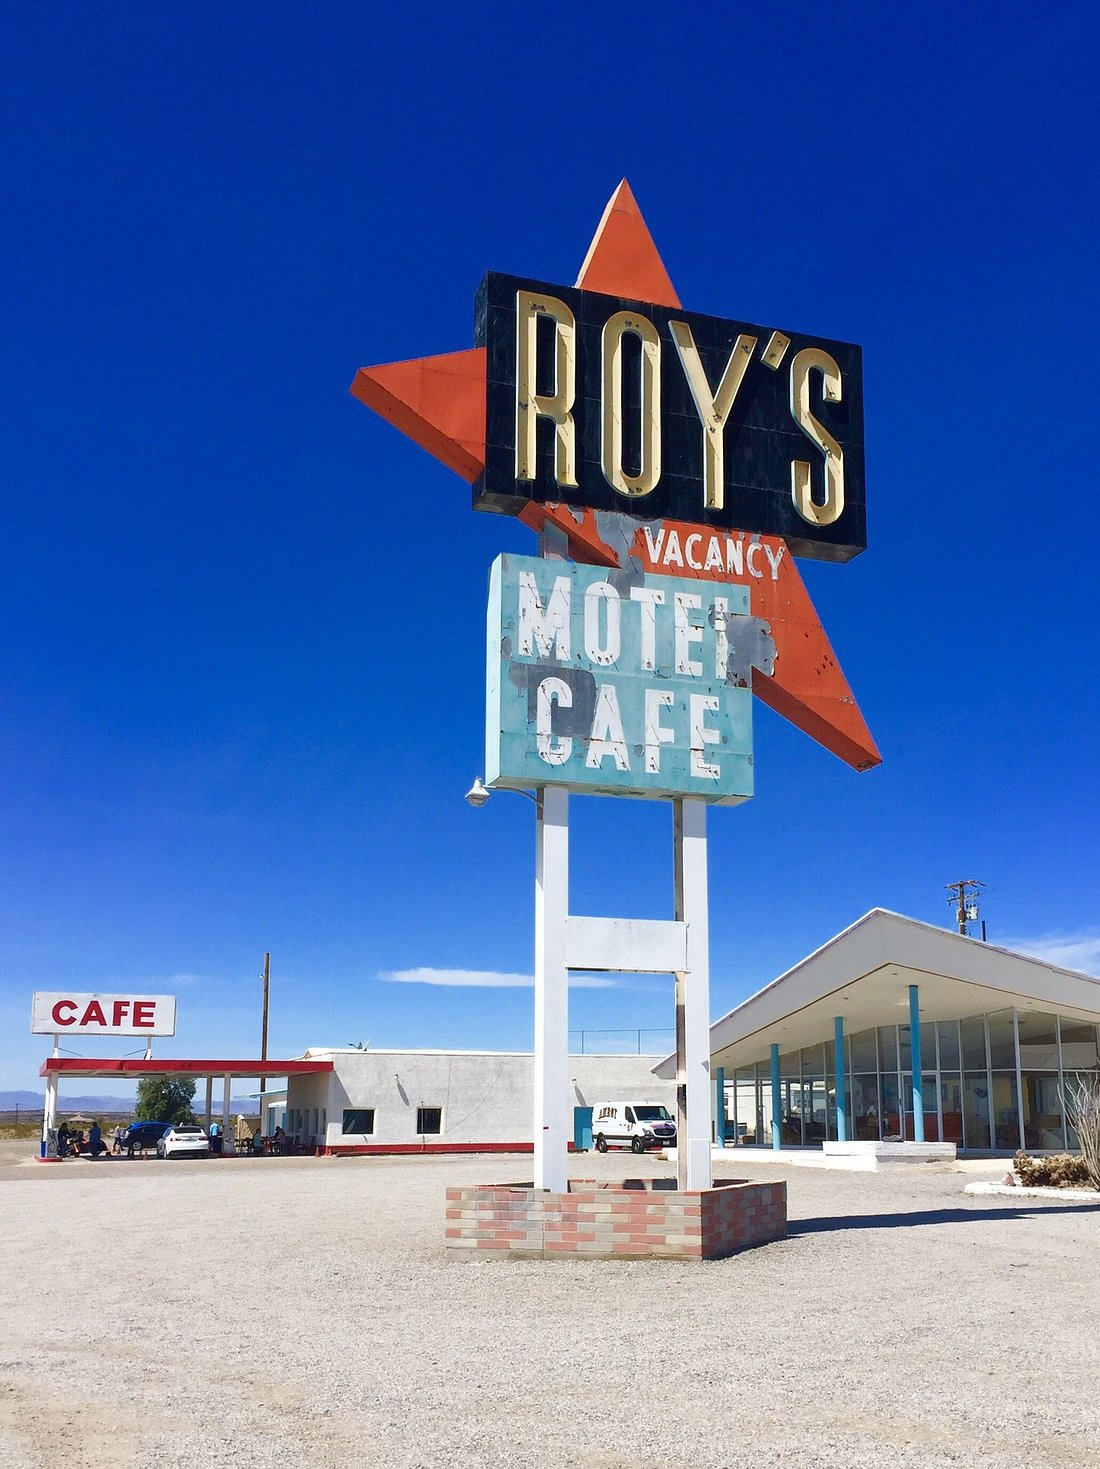 <p><b>Amboy, CA</b></p><p><a href="https://visitamboy.com">Roy's</a> is perhaps the most famous landmark on Route 66 thanks to its iconic sign that can be seen from miles around the Mojave Desert. When it opened in 1938, it was the only place to get gas, food, and lodging in the area. The famous 50-foot neon sign dates from 1959, and it's appeared in plenty of movies, TV shows, and music videos. </p>